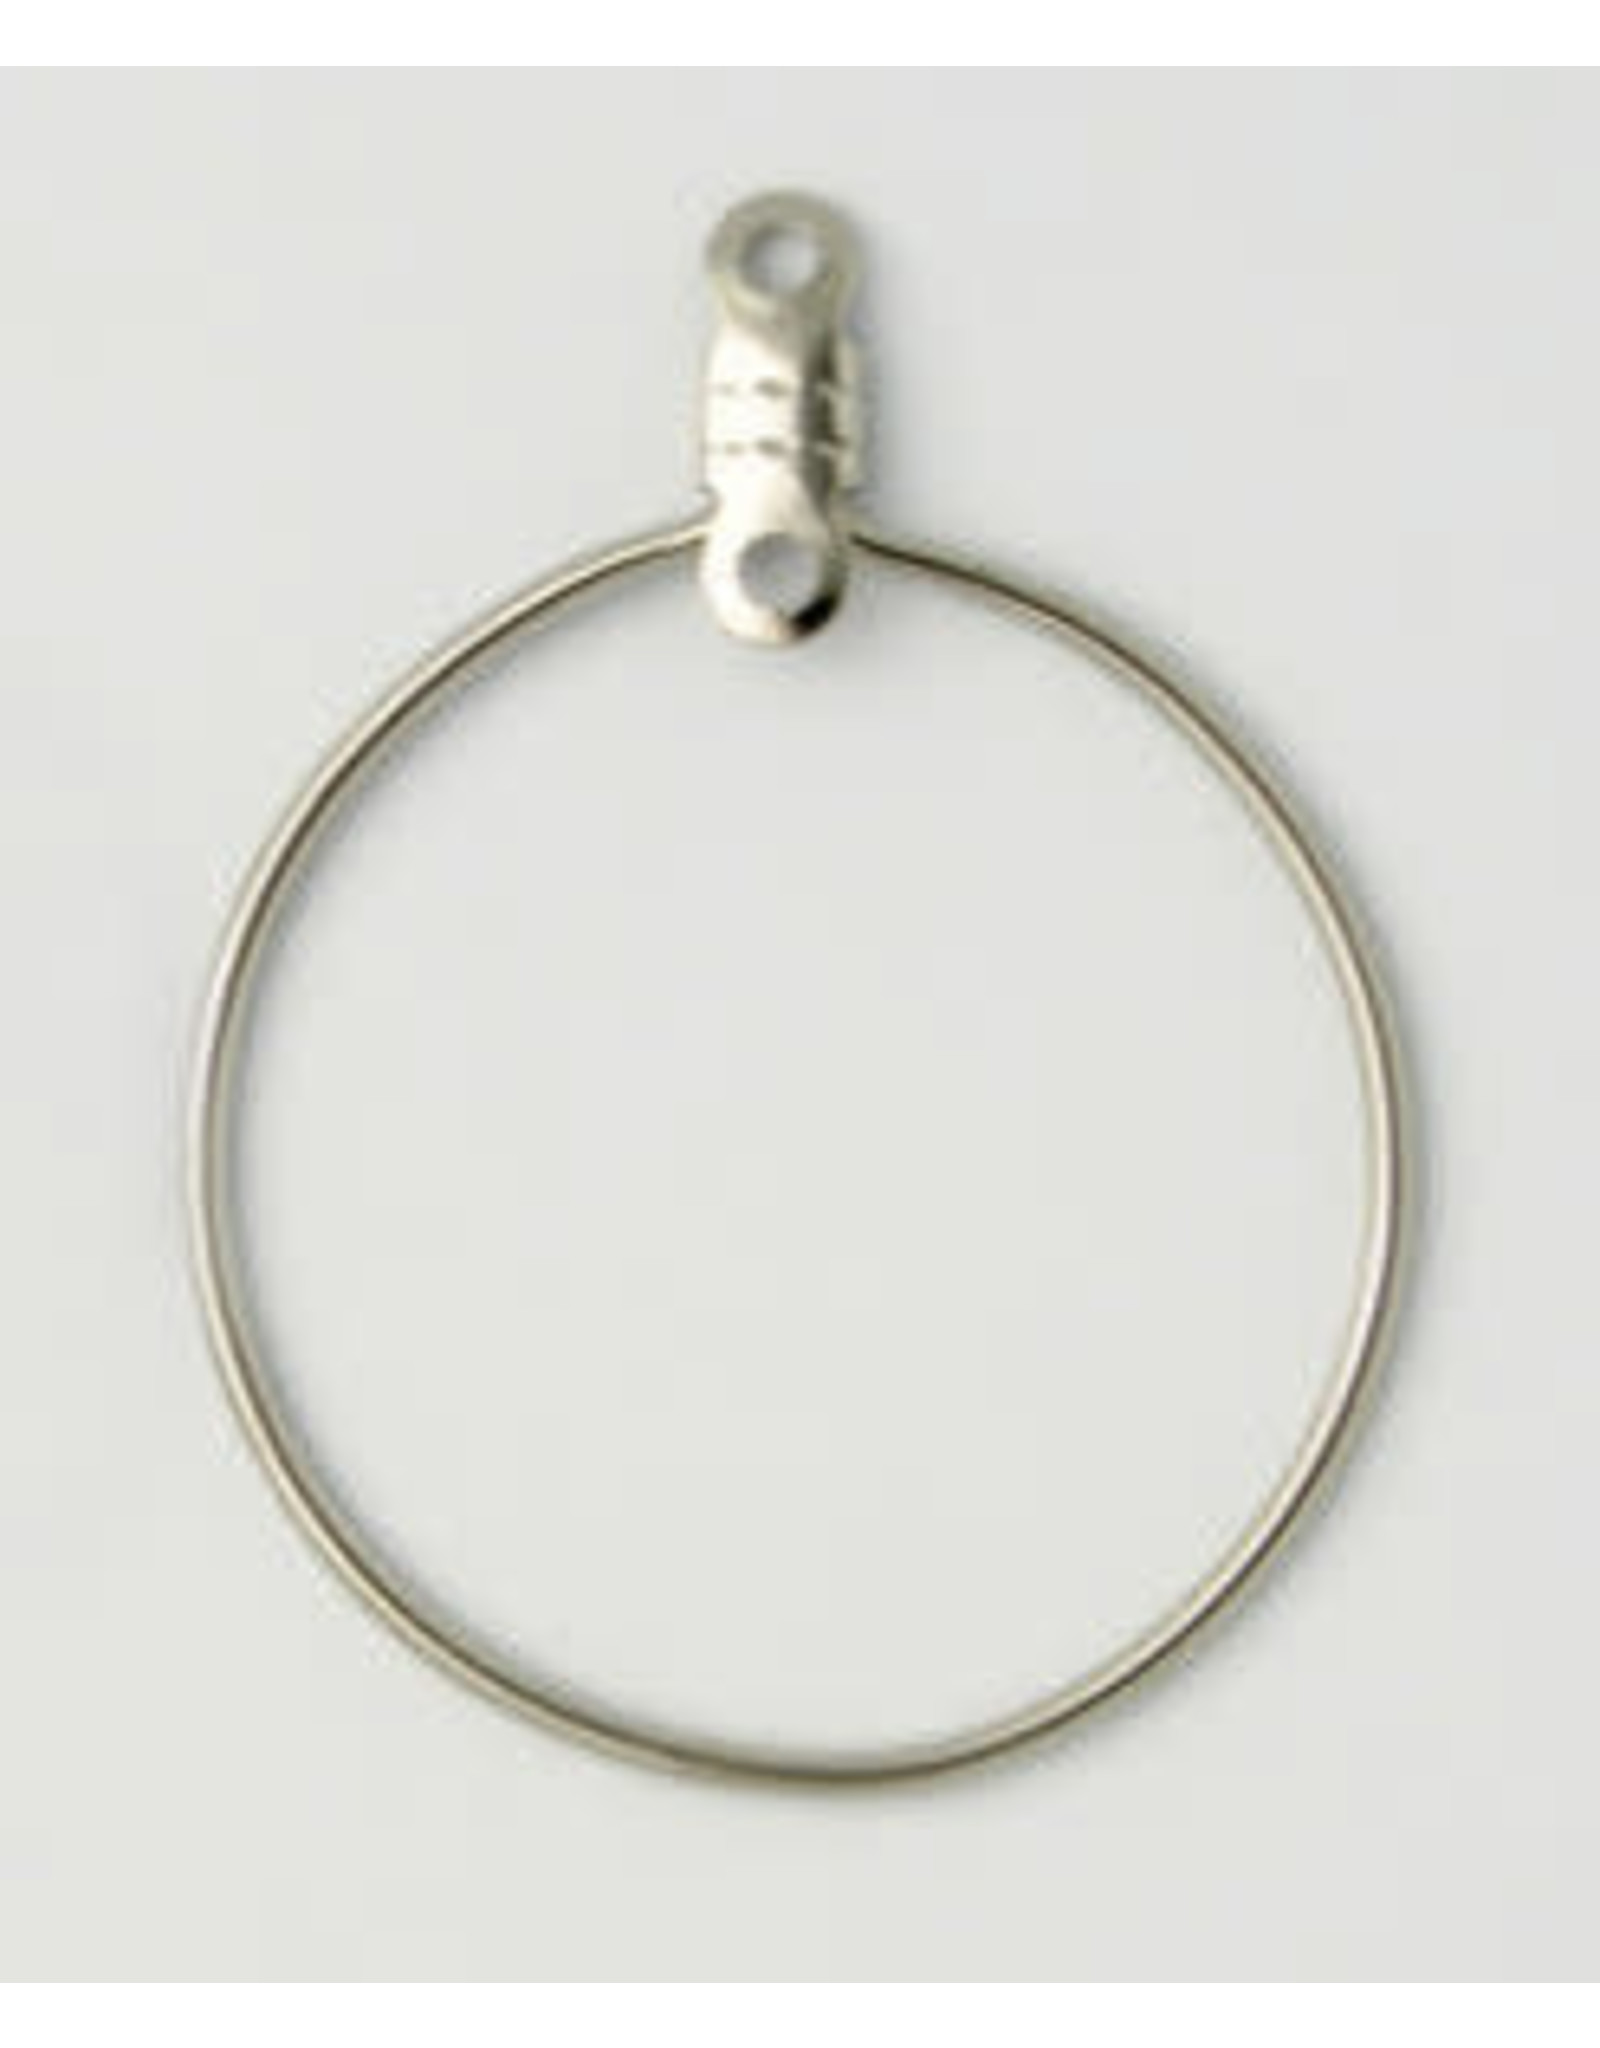 Earring Hoops with Link 25mm Nickel Colour NF x10